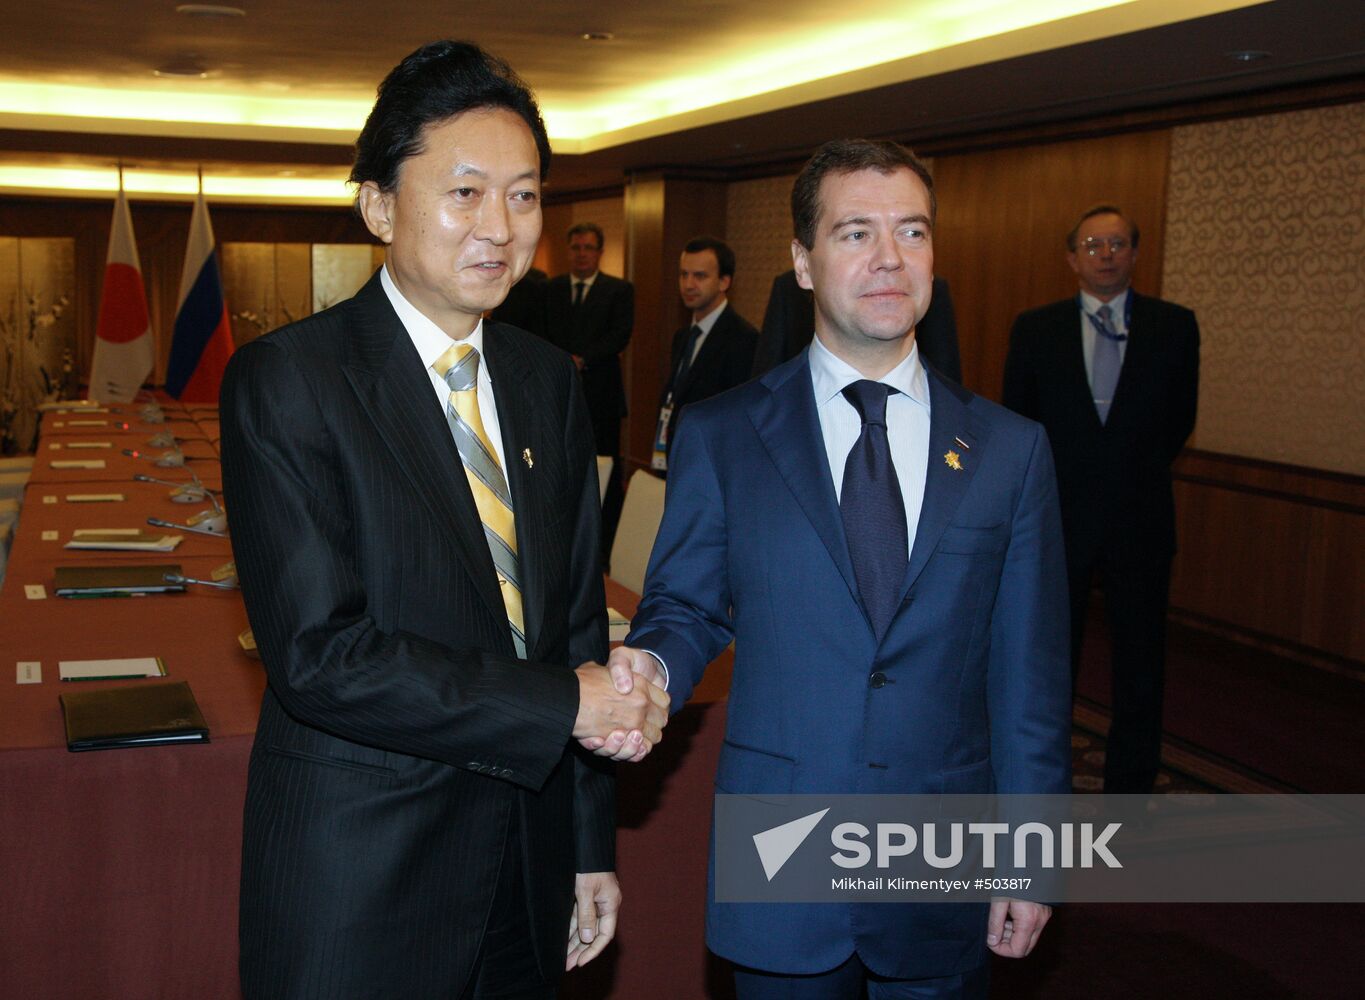 Russian President and Prime Minister of Japan met in Singapore